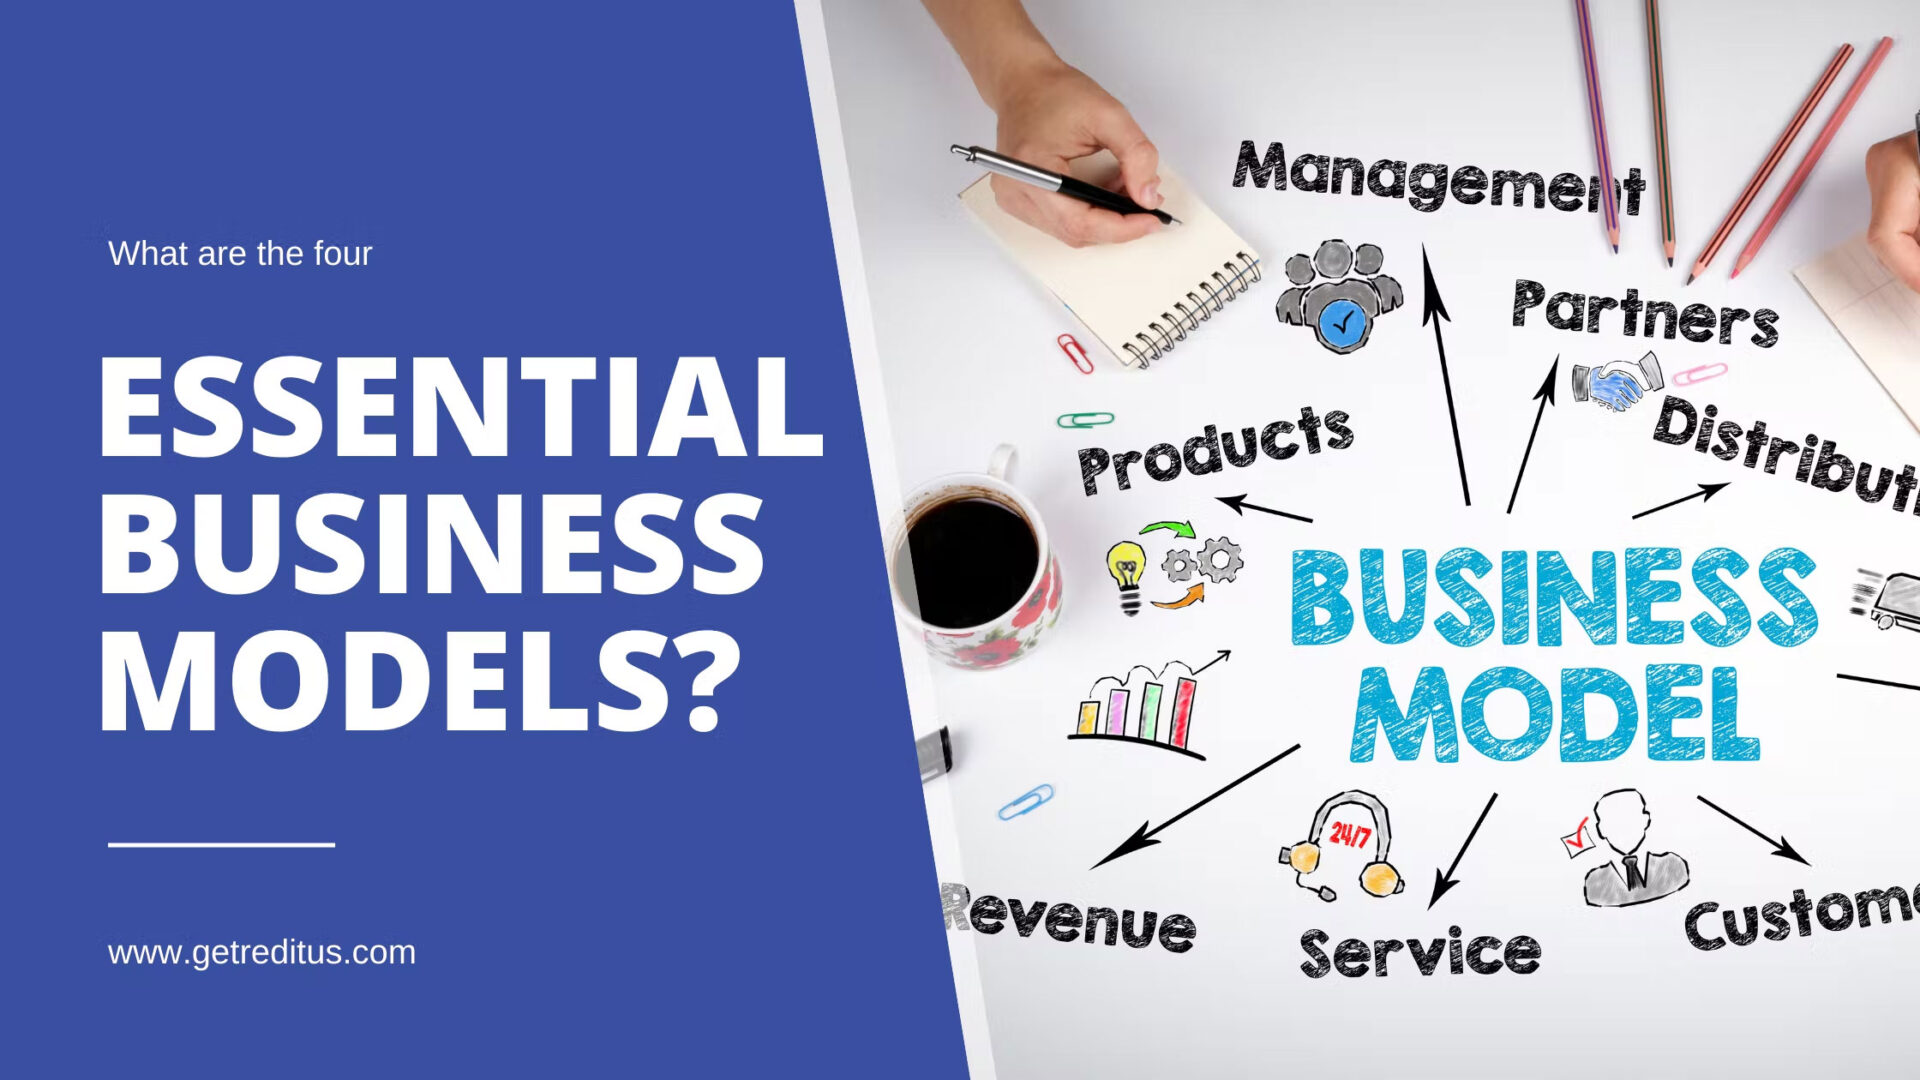 What are the Four Essential Business Models?